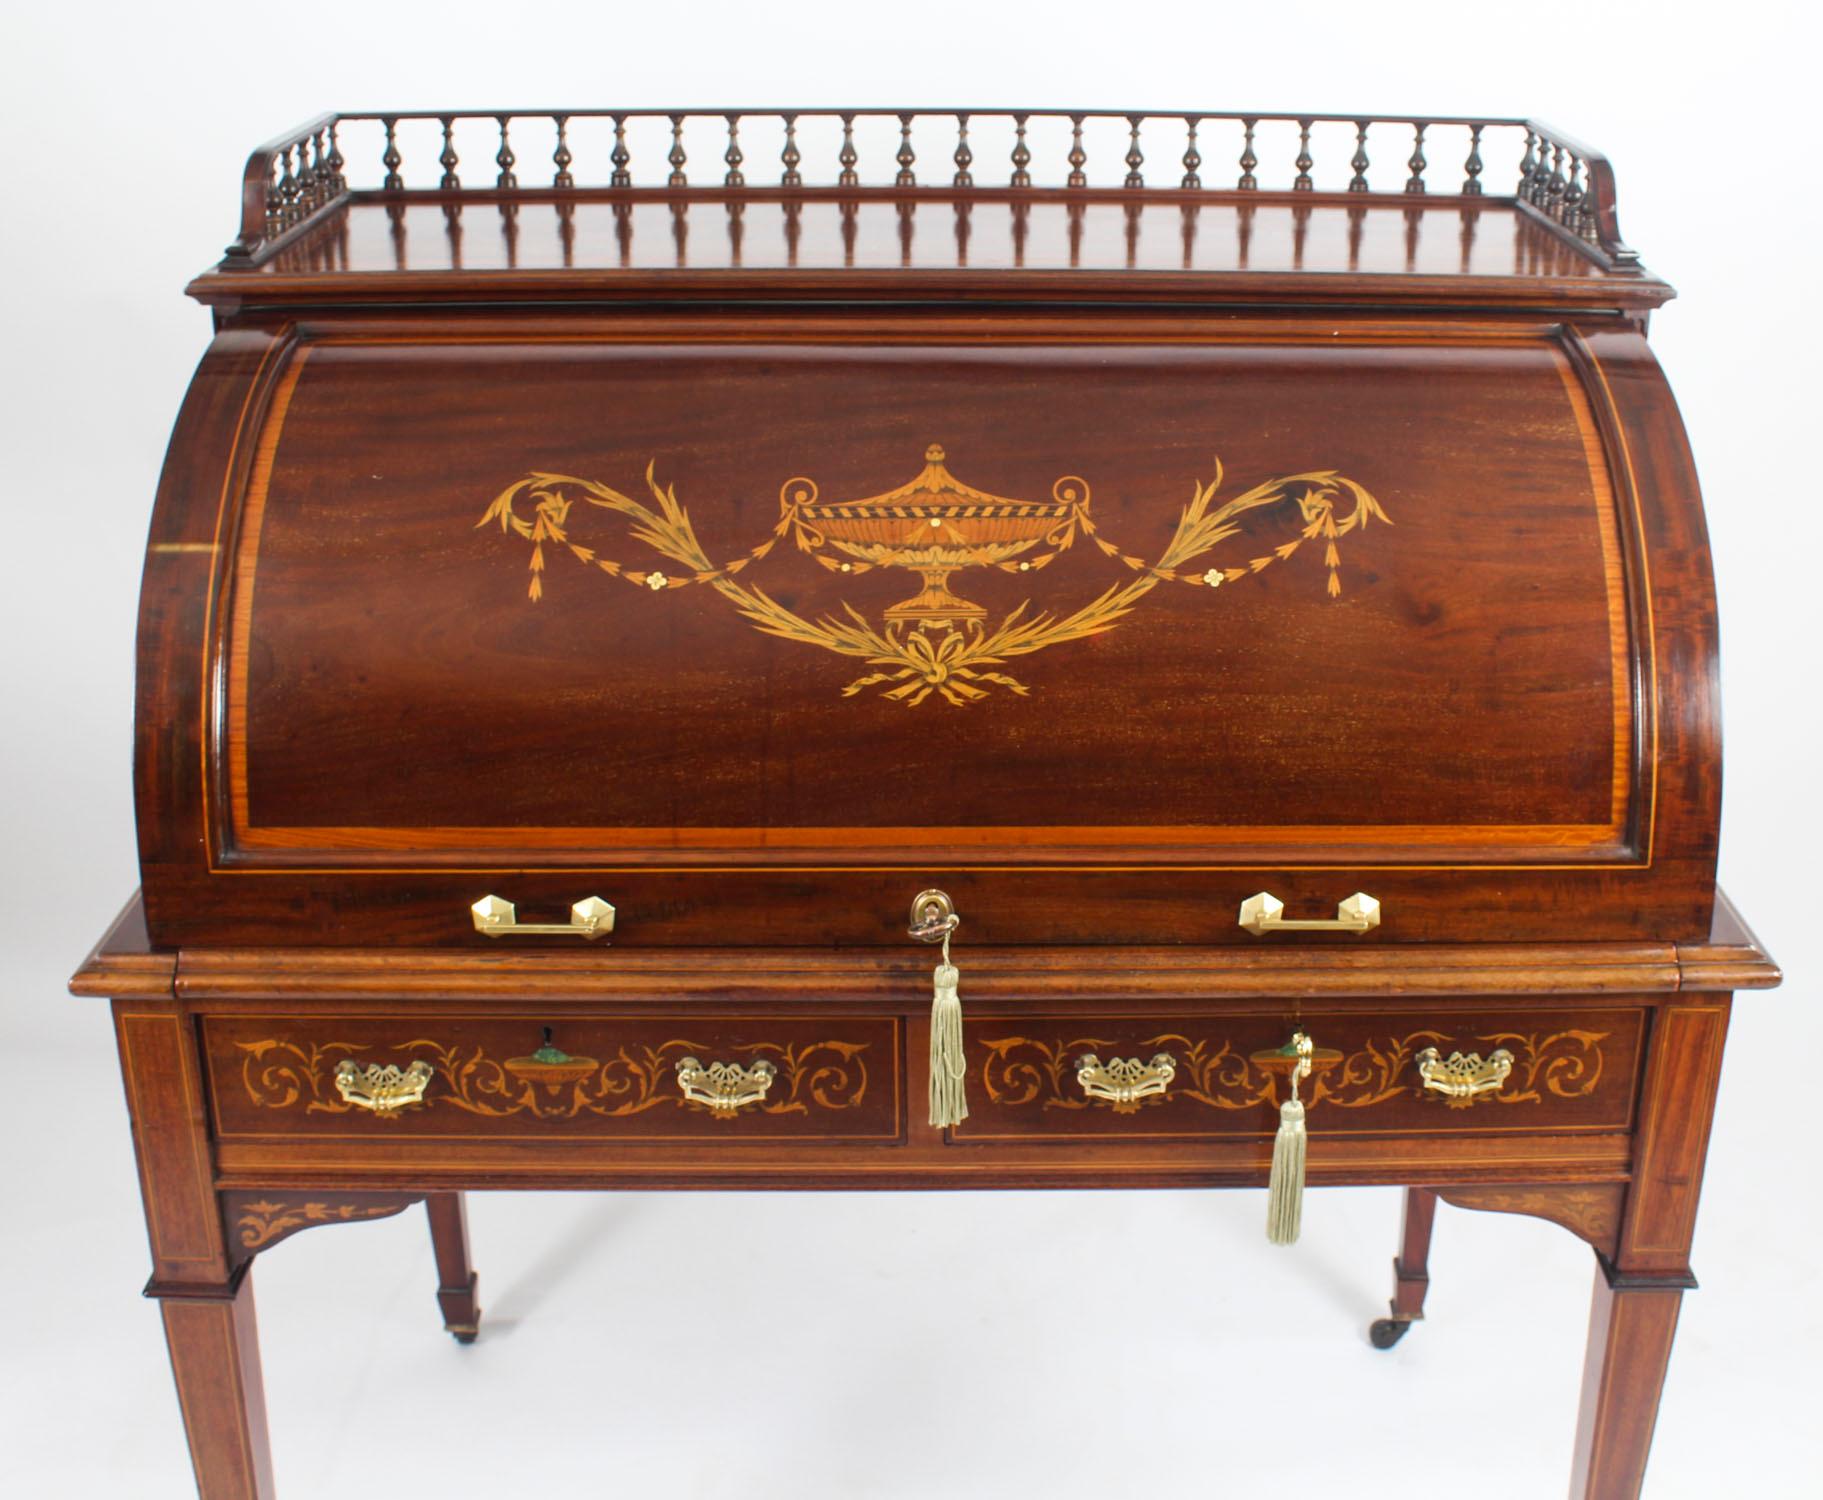 Victorian Antique Flame Mahogany and Inlaid Cylinder Bureau Desk Shoolbred 19th Century